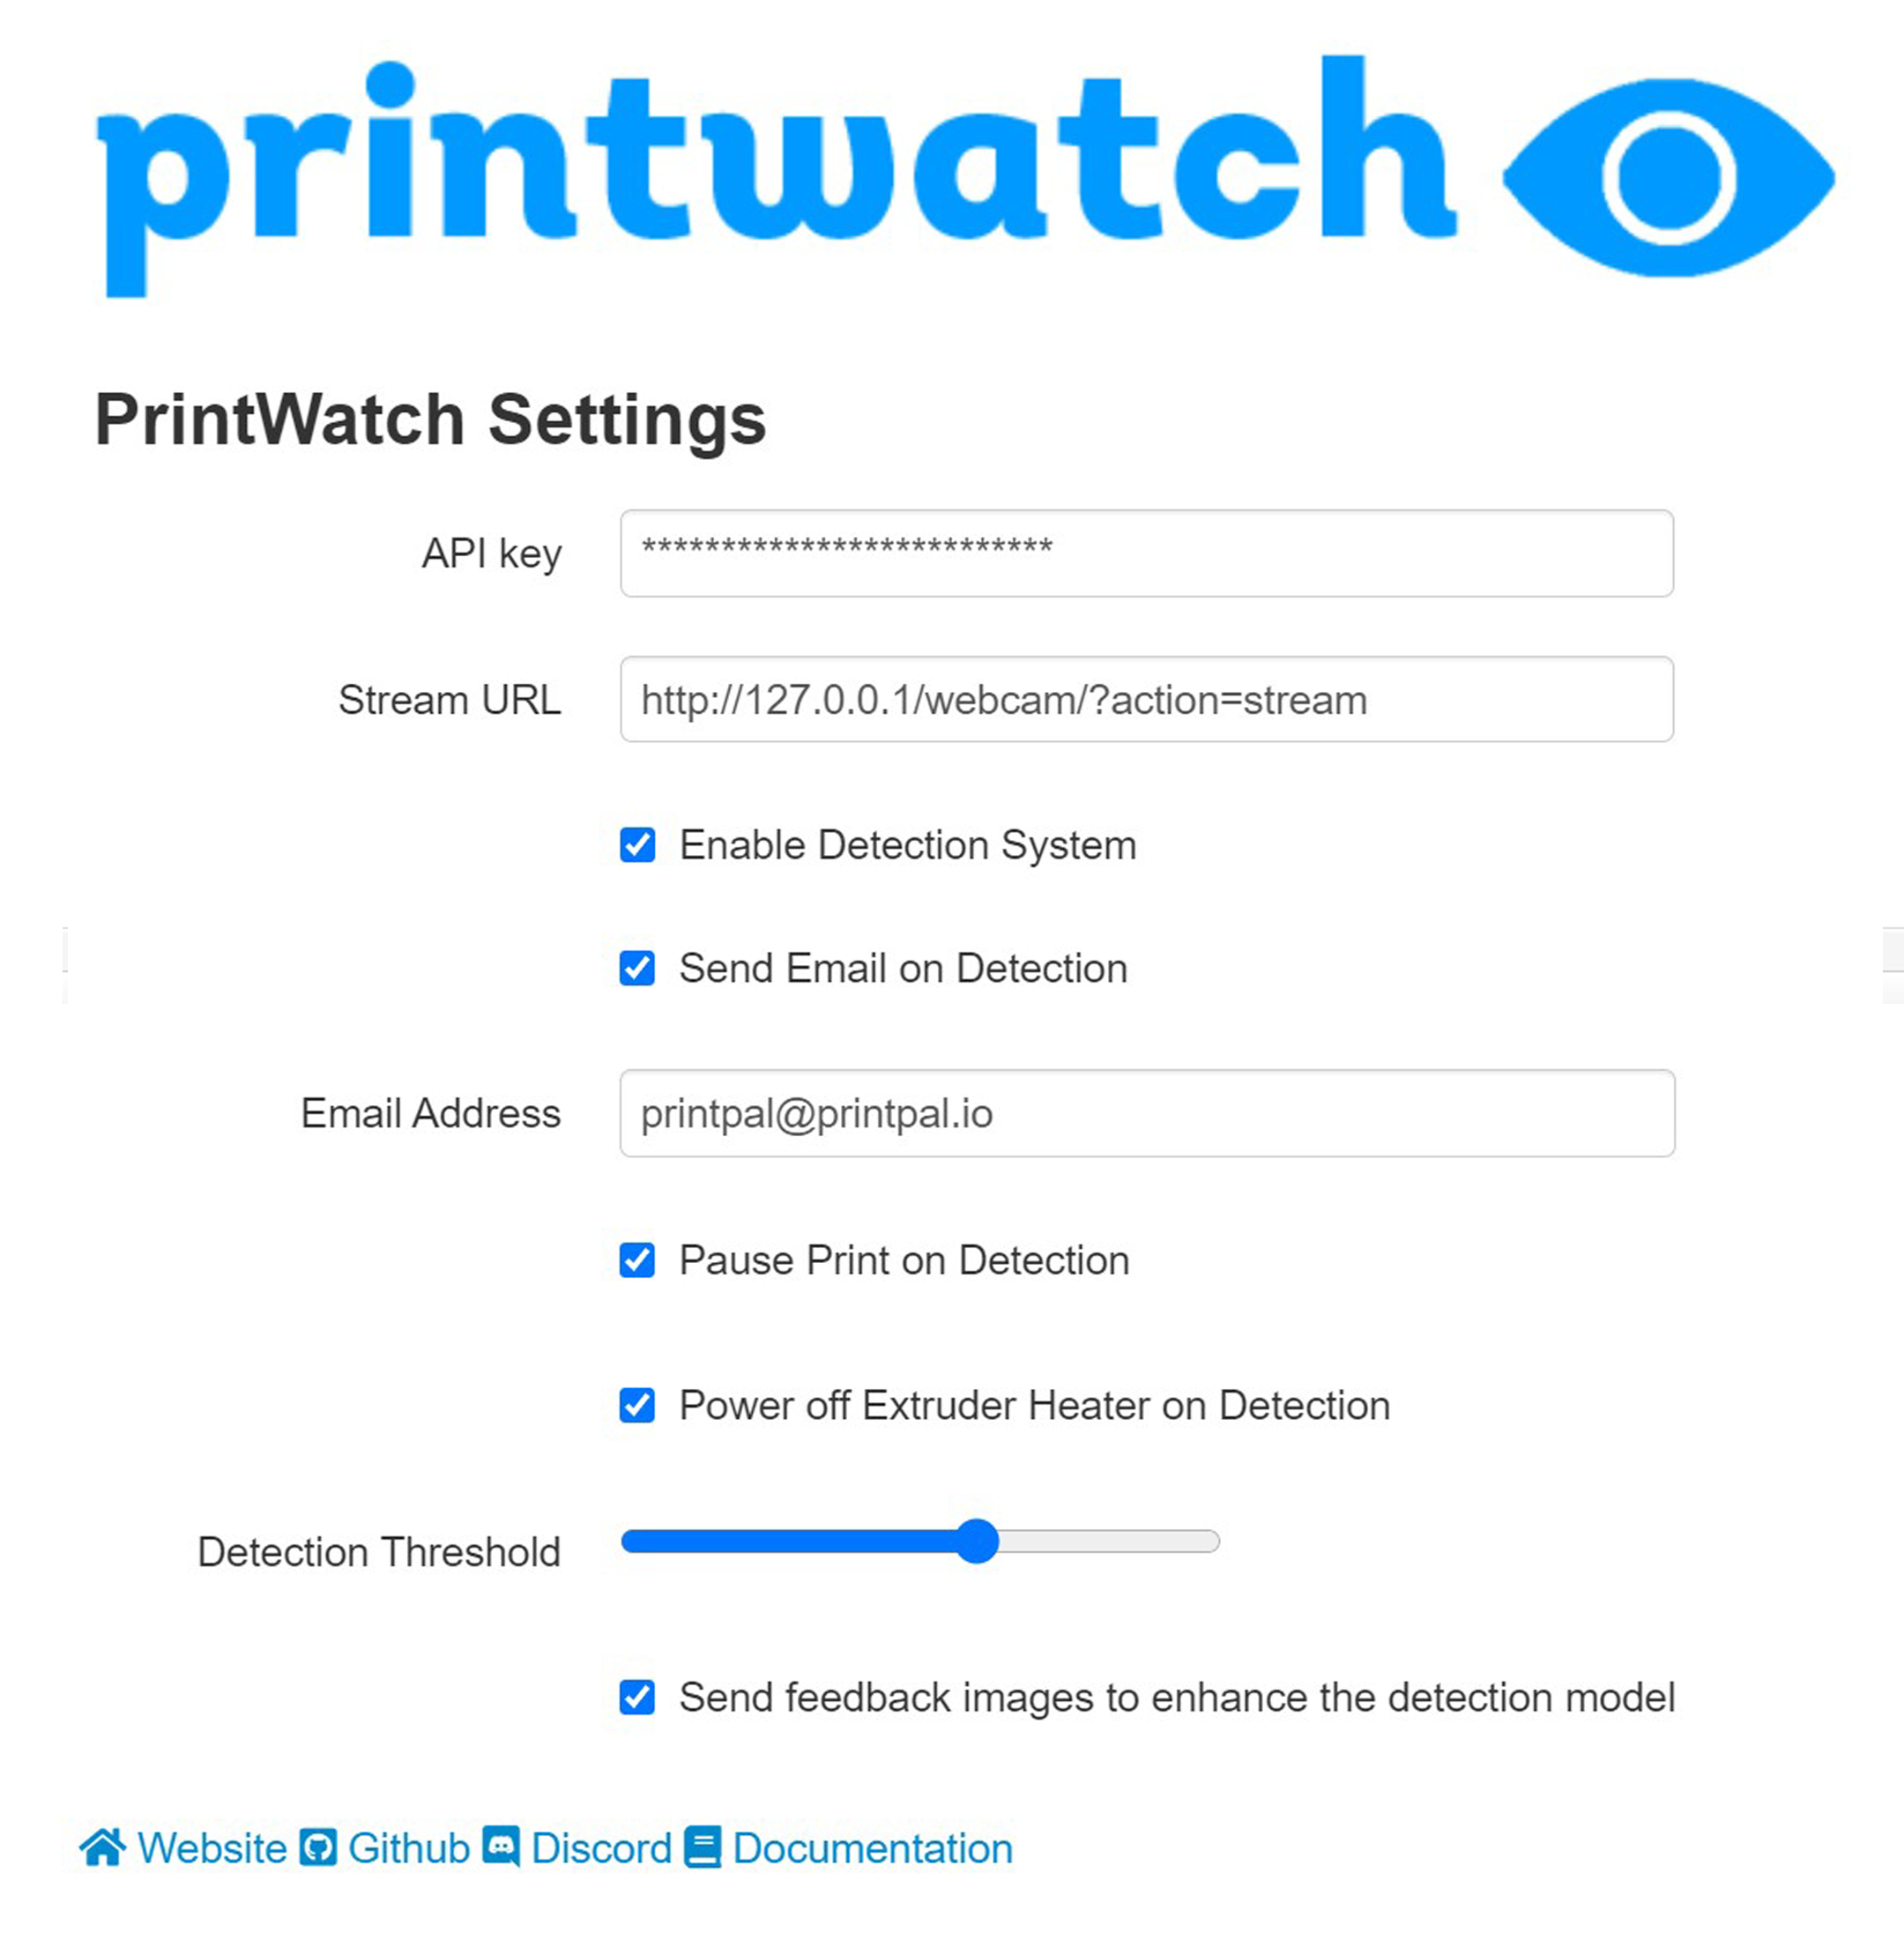 Configurable settings allow you to customize how PrintWatch works for you.